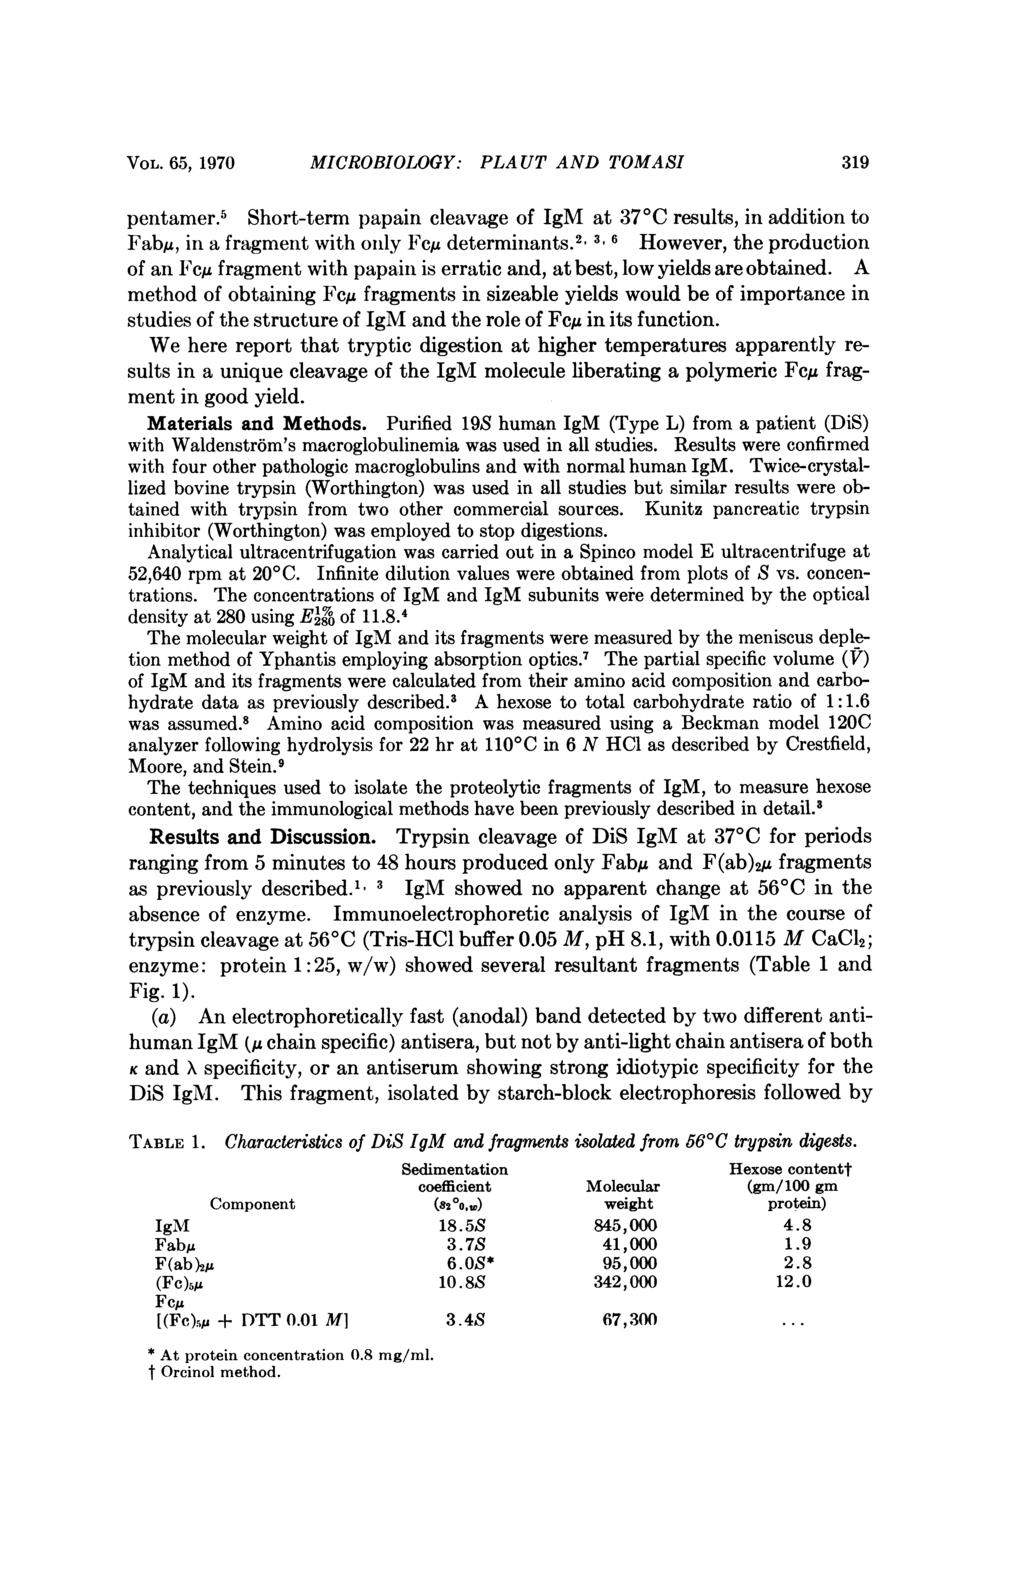 VOL. 65, 1970 MICROBIOLOGY: PLAUT AND TOMASI 319 pentamer.5 Short-term papain cleavage of IgM at 370C results, in addition to Fab/u, in a fragment with only FcMi determinants.